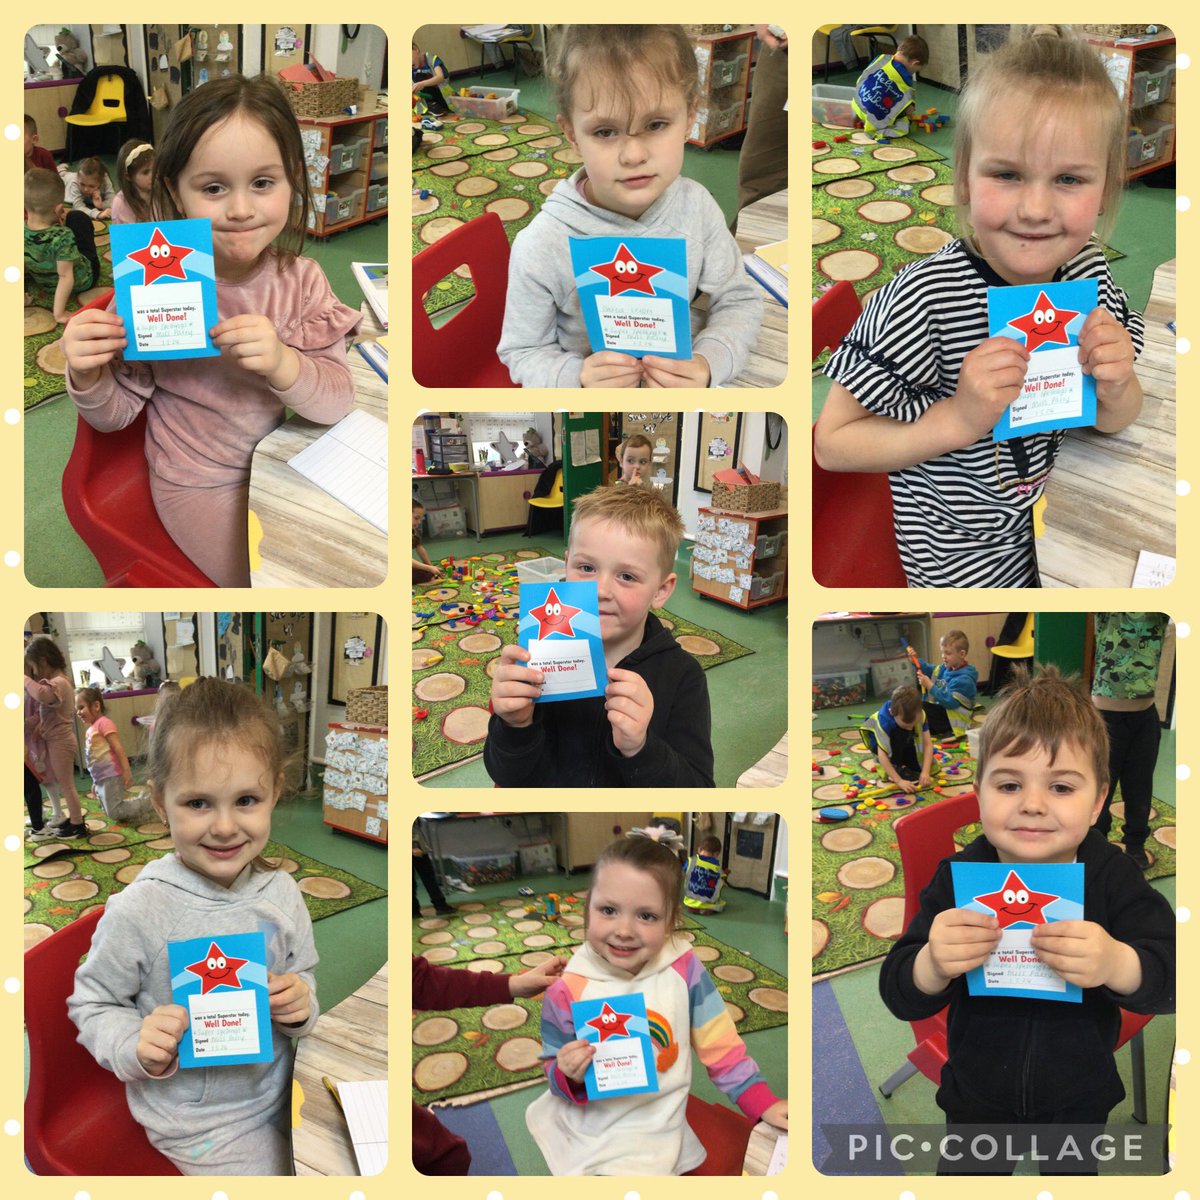 Look at our super spellers in Dosbarth Un this week… Bendigeddig blant 🌟🌟You surely are ambitious capable learners. @garntegprimary @MrATully95 #notinmissout